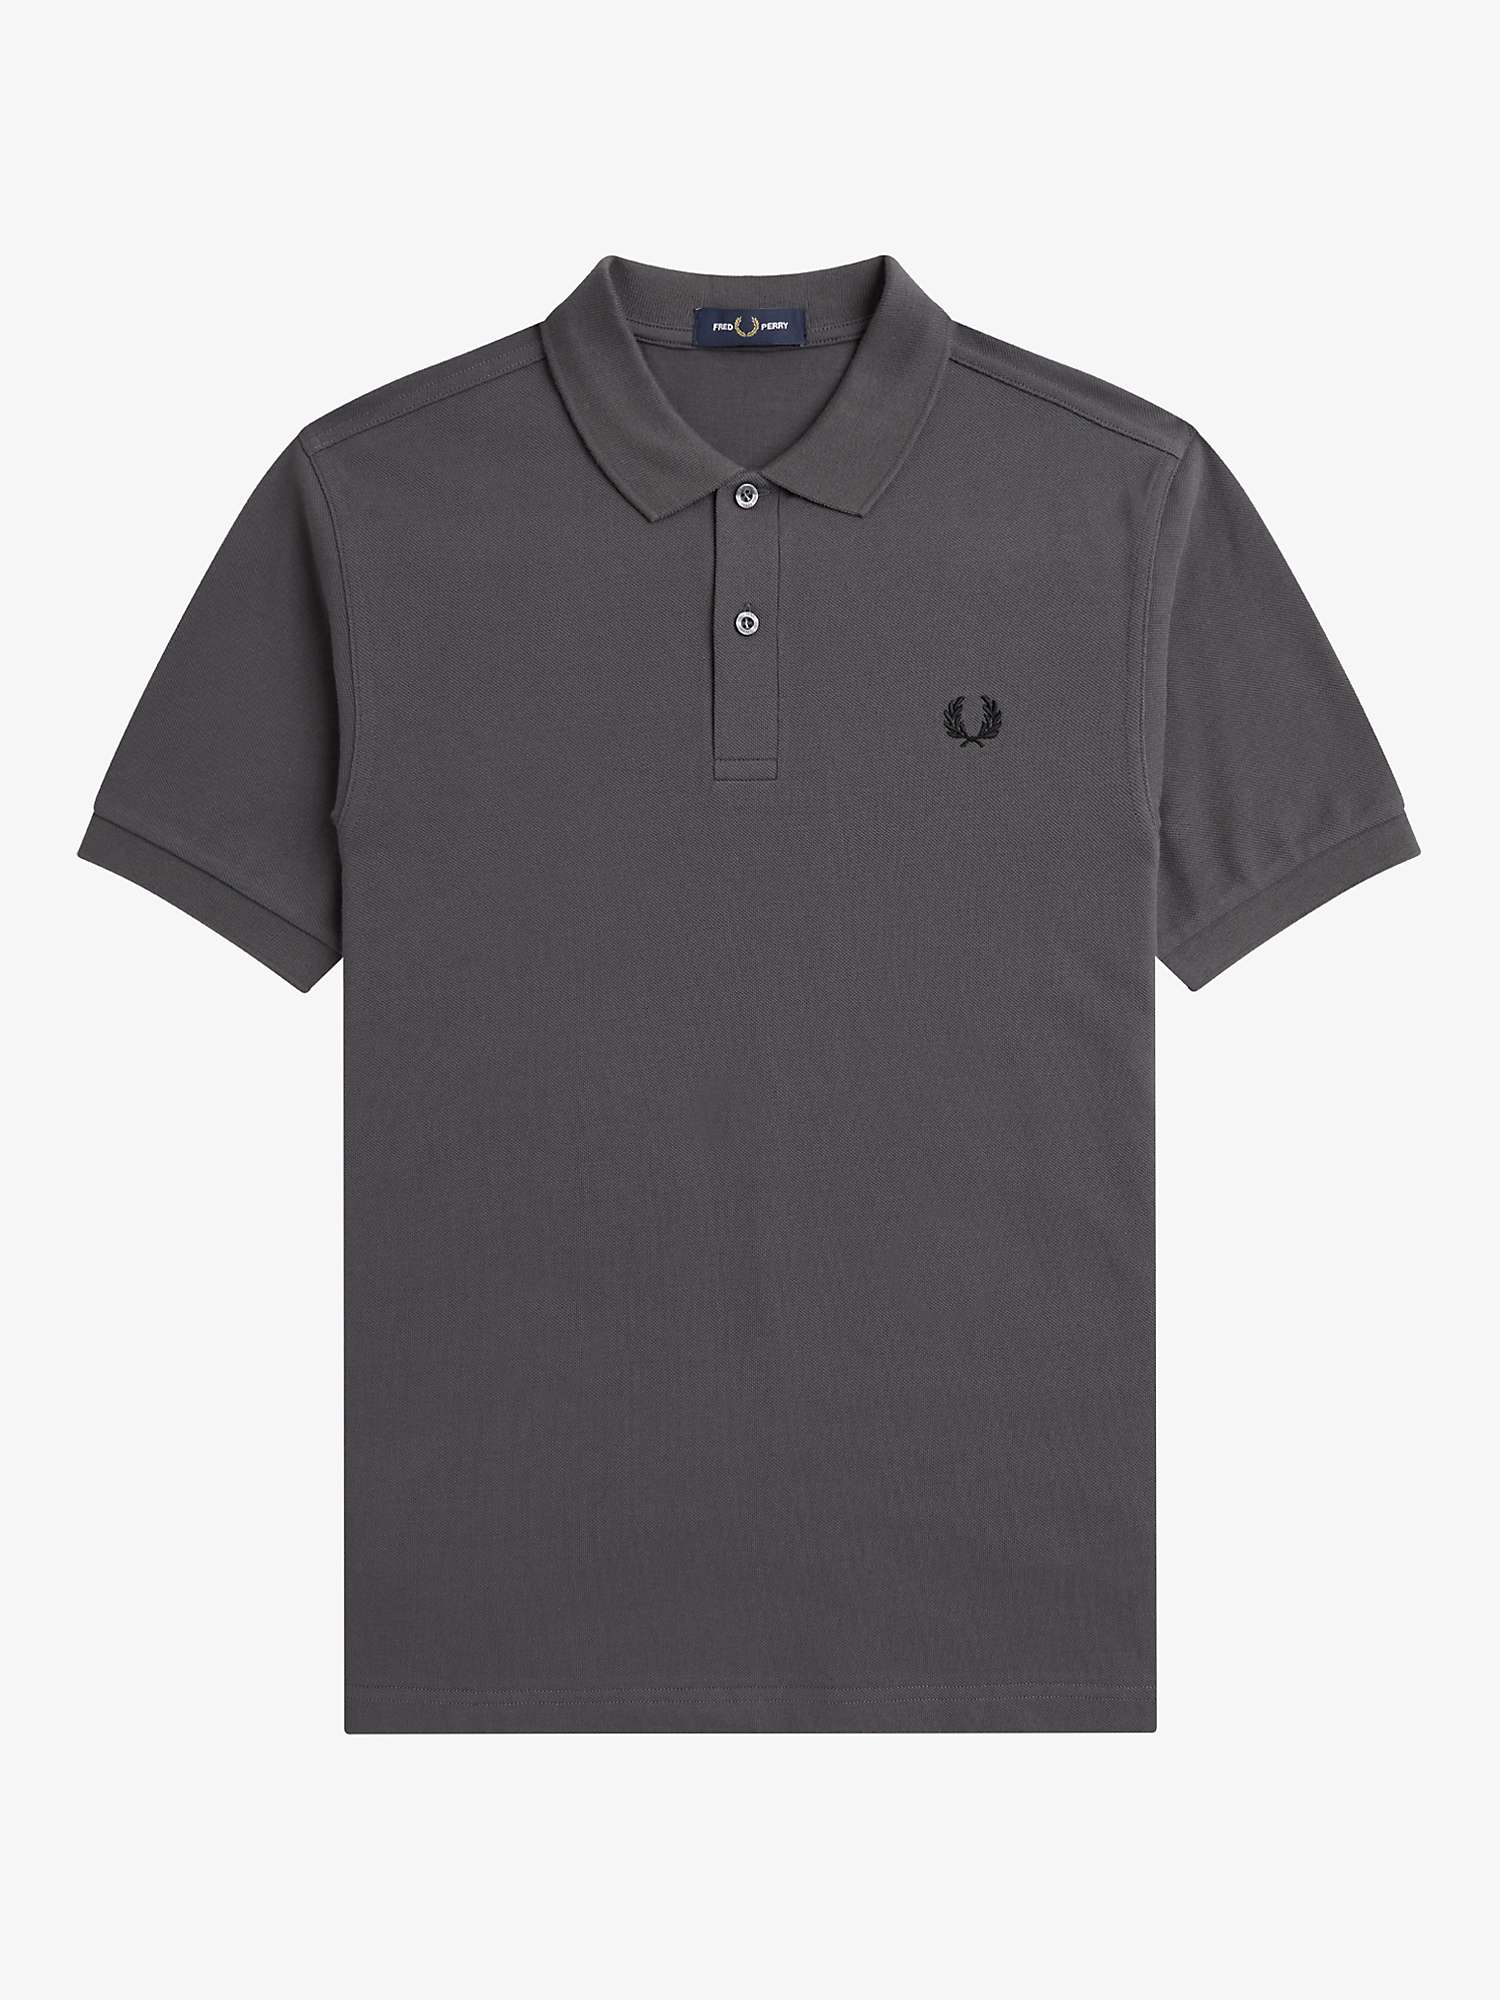 Buy Fred Perry Plain Regular Fit Polo Shirt Online at johnlewis.com